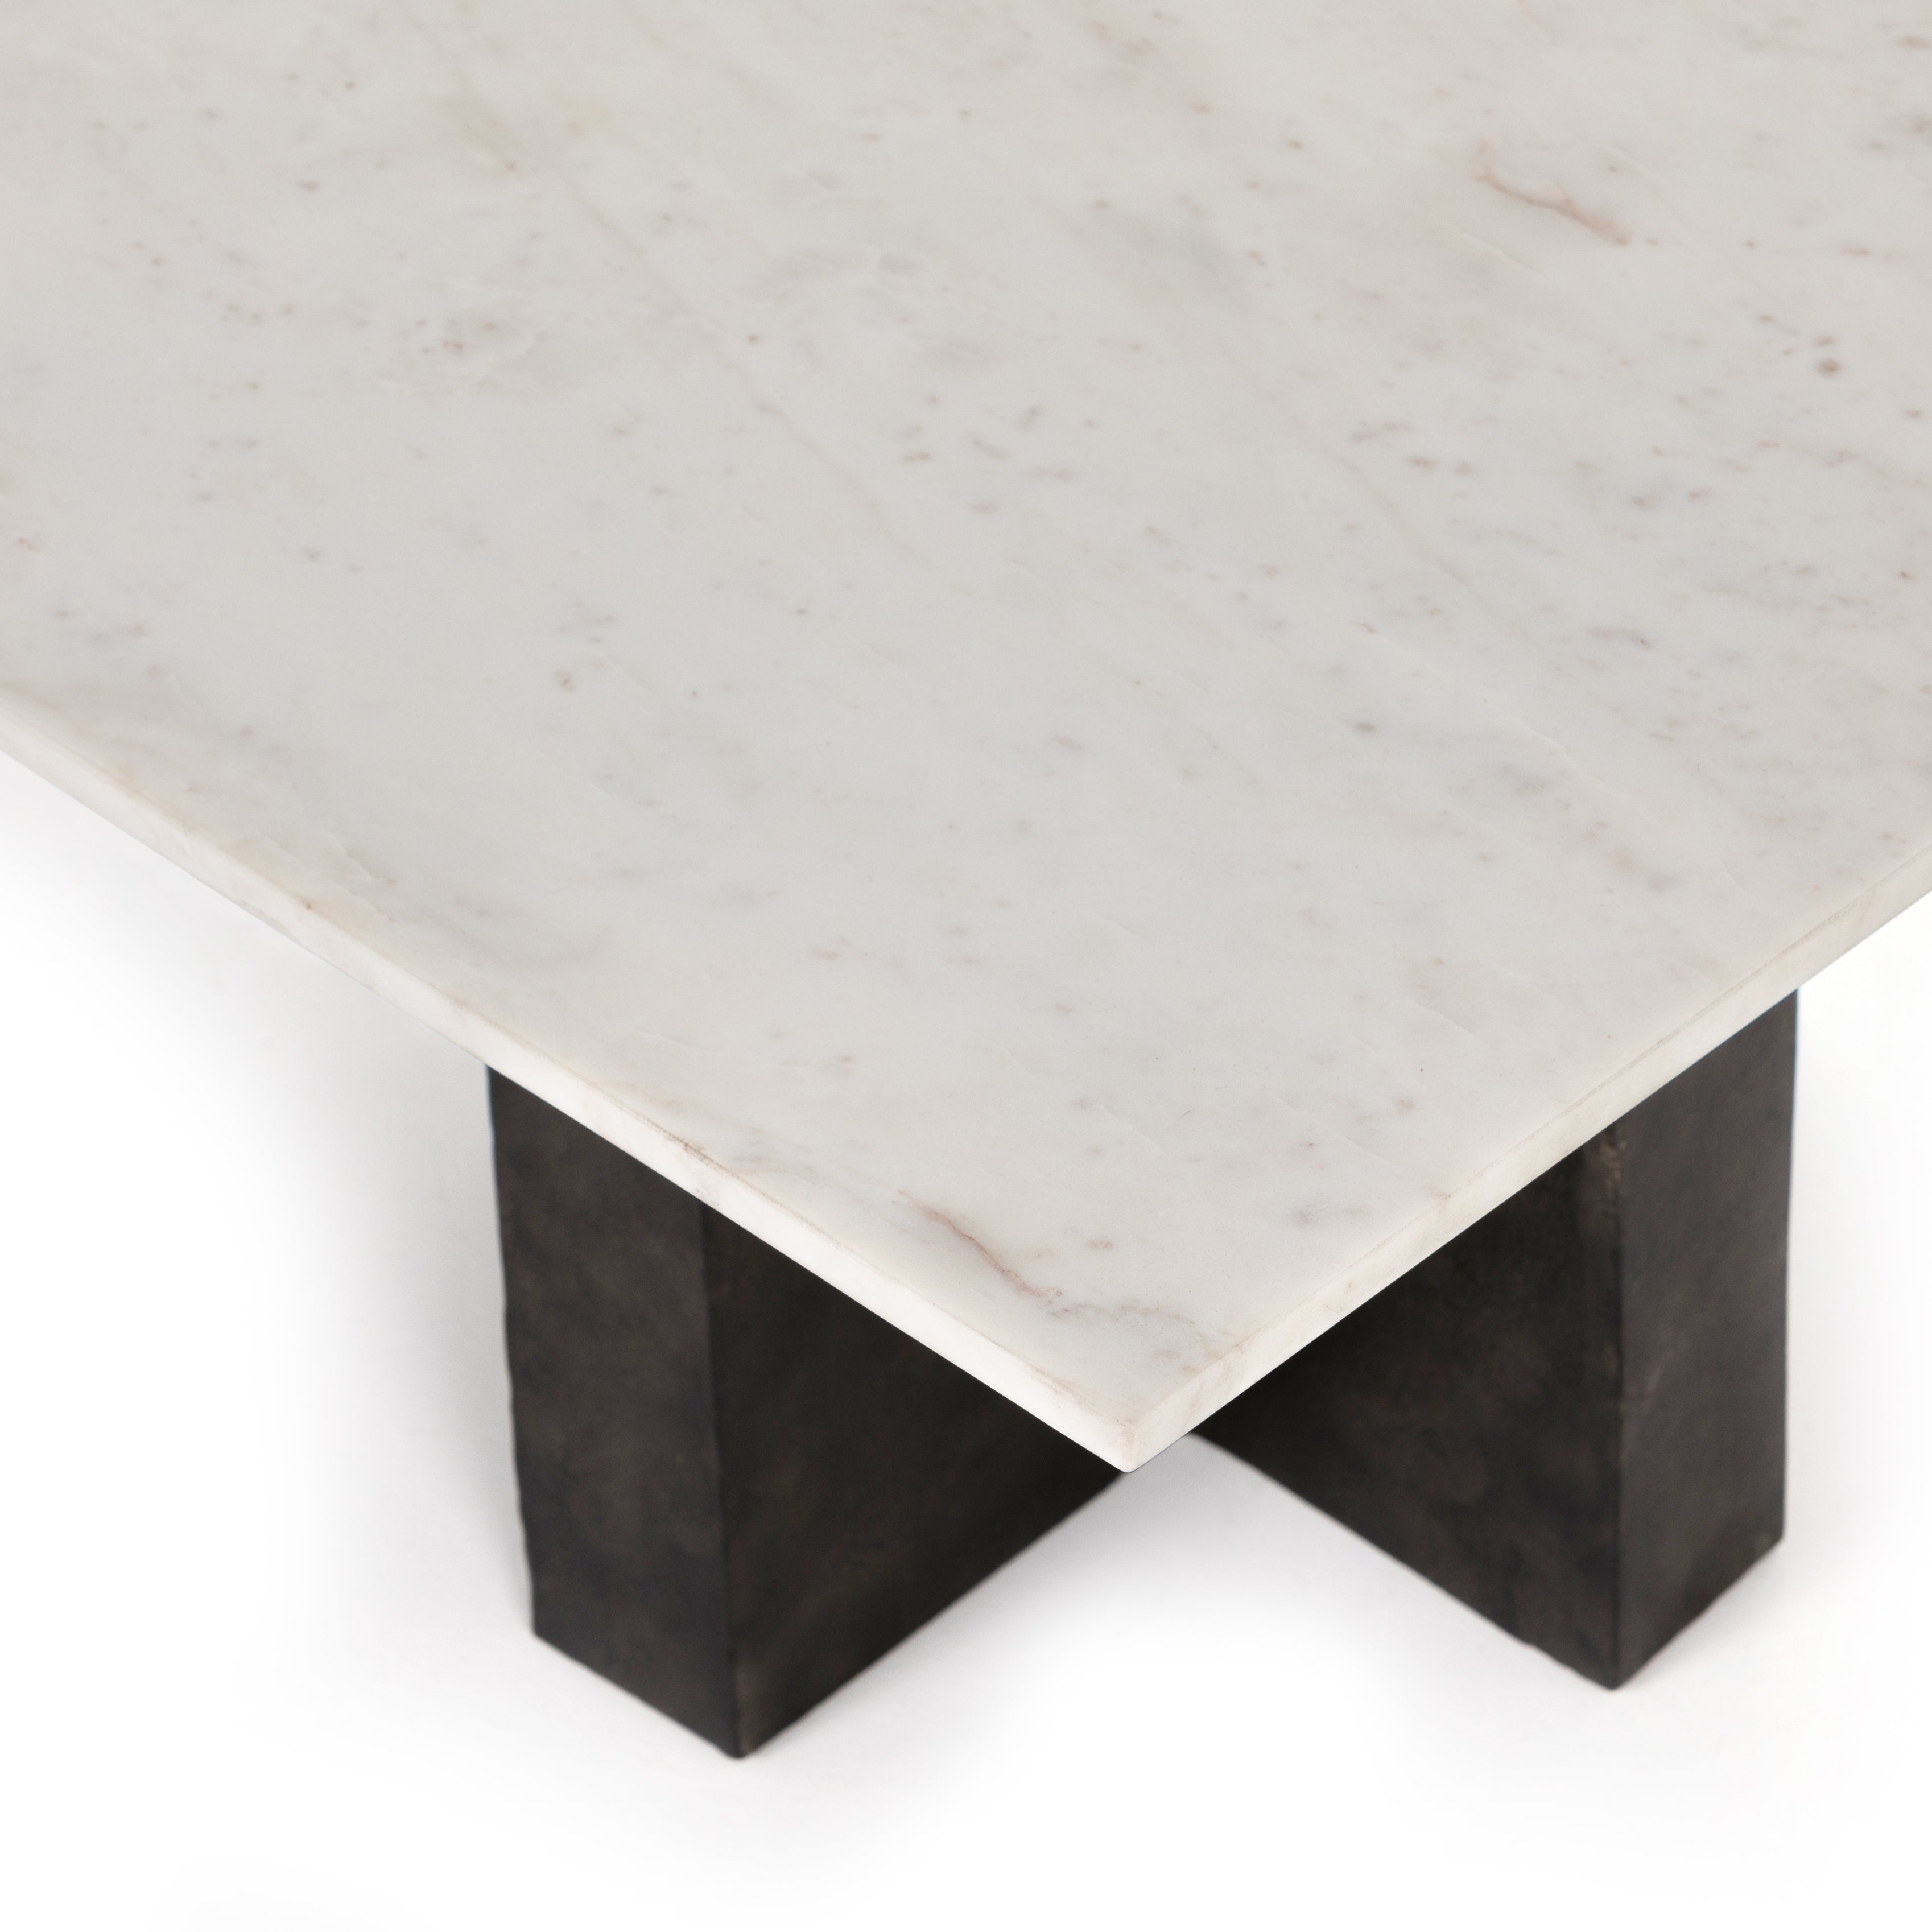 We love the legs of this Terrell Coffee Table - Raw Black. Finished in a raw black, uniquely angular cast aluminum legs support a rectangular tabletop of solid marble in a clean, polished white - a sleek, modern look to add in any living room or lounge area.   Overall Dimensions: 55.00"w x 29.00"d x 16.50"h